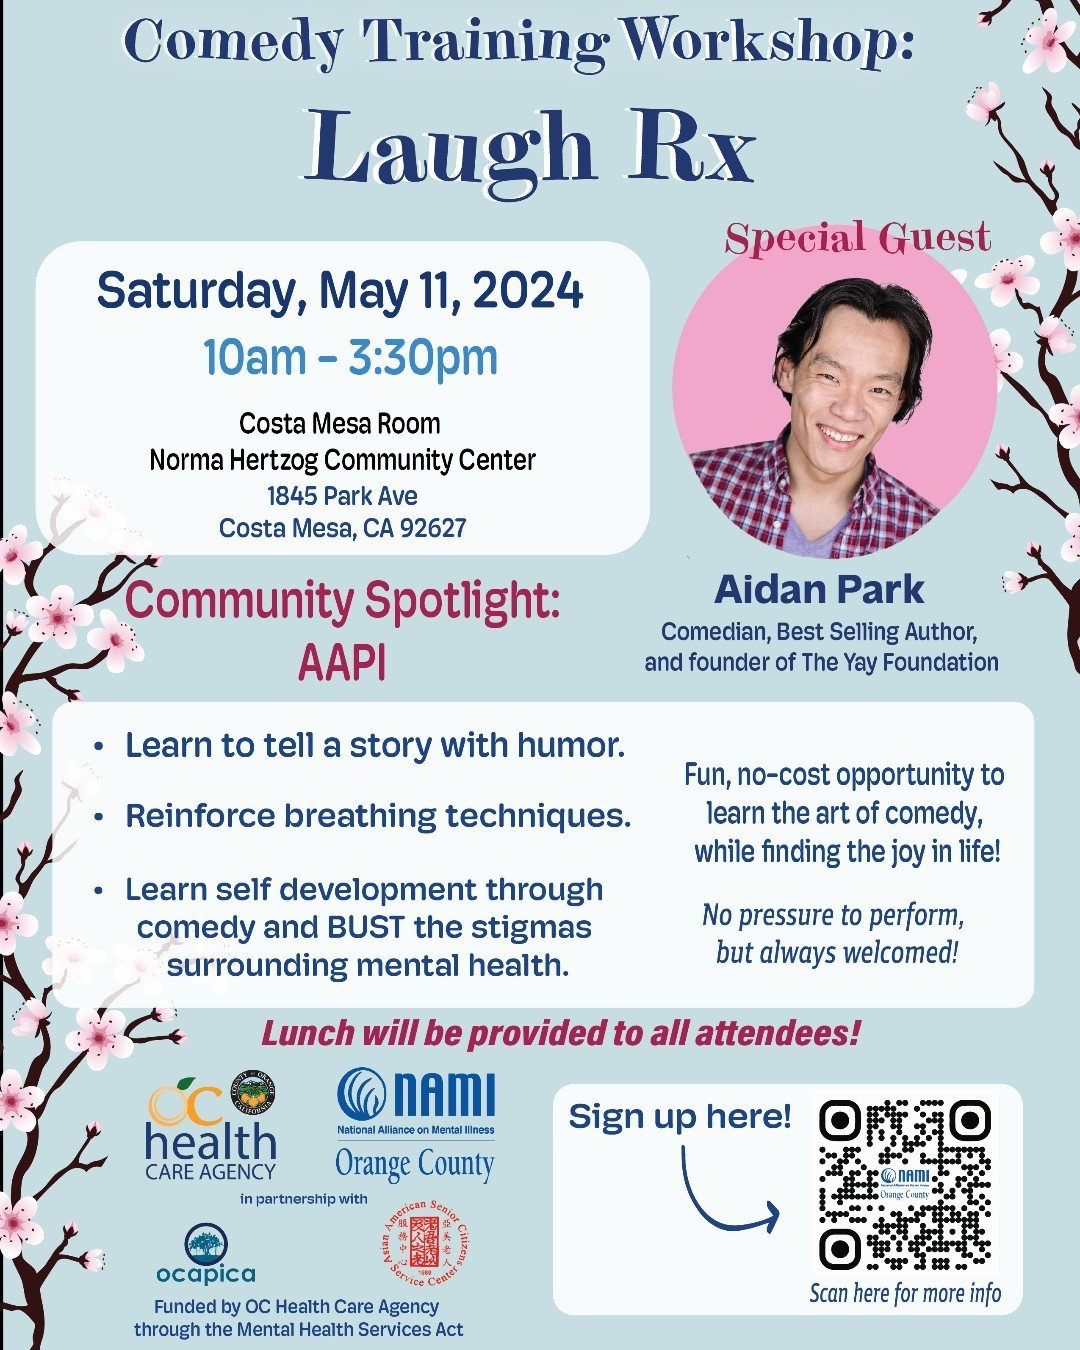 Share a laugh with us! 🎤 Our next Laugh Rx Stand-up Comedy Workshop will take place on Saturday, May 11th at the Norma Hertzog Community Center in Costa Mesa, CA. 🌟 The Workshop will be led by Aidan Park, professional comedian, bestselling author, 